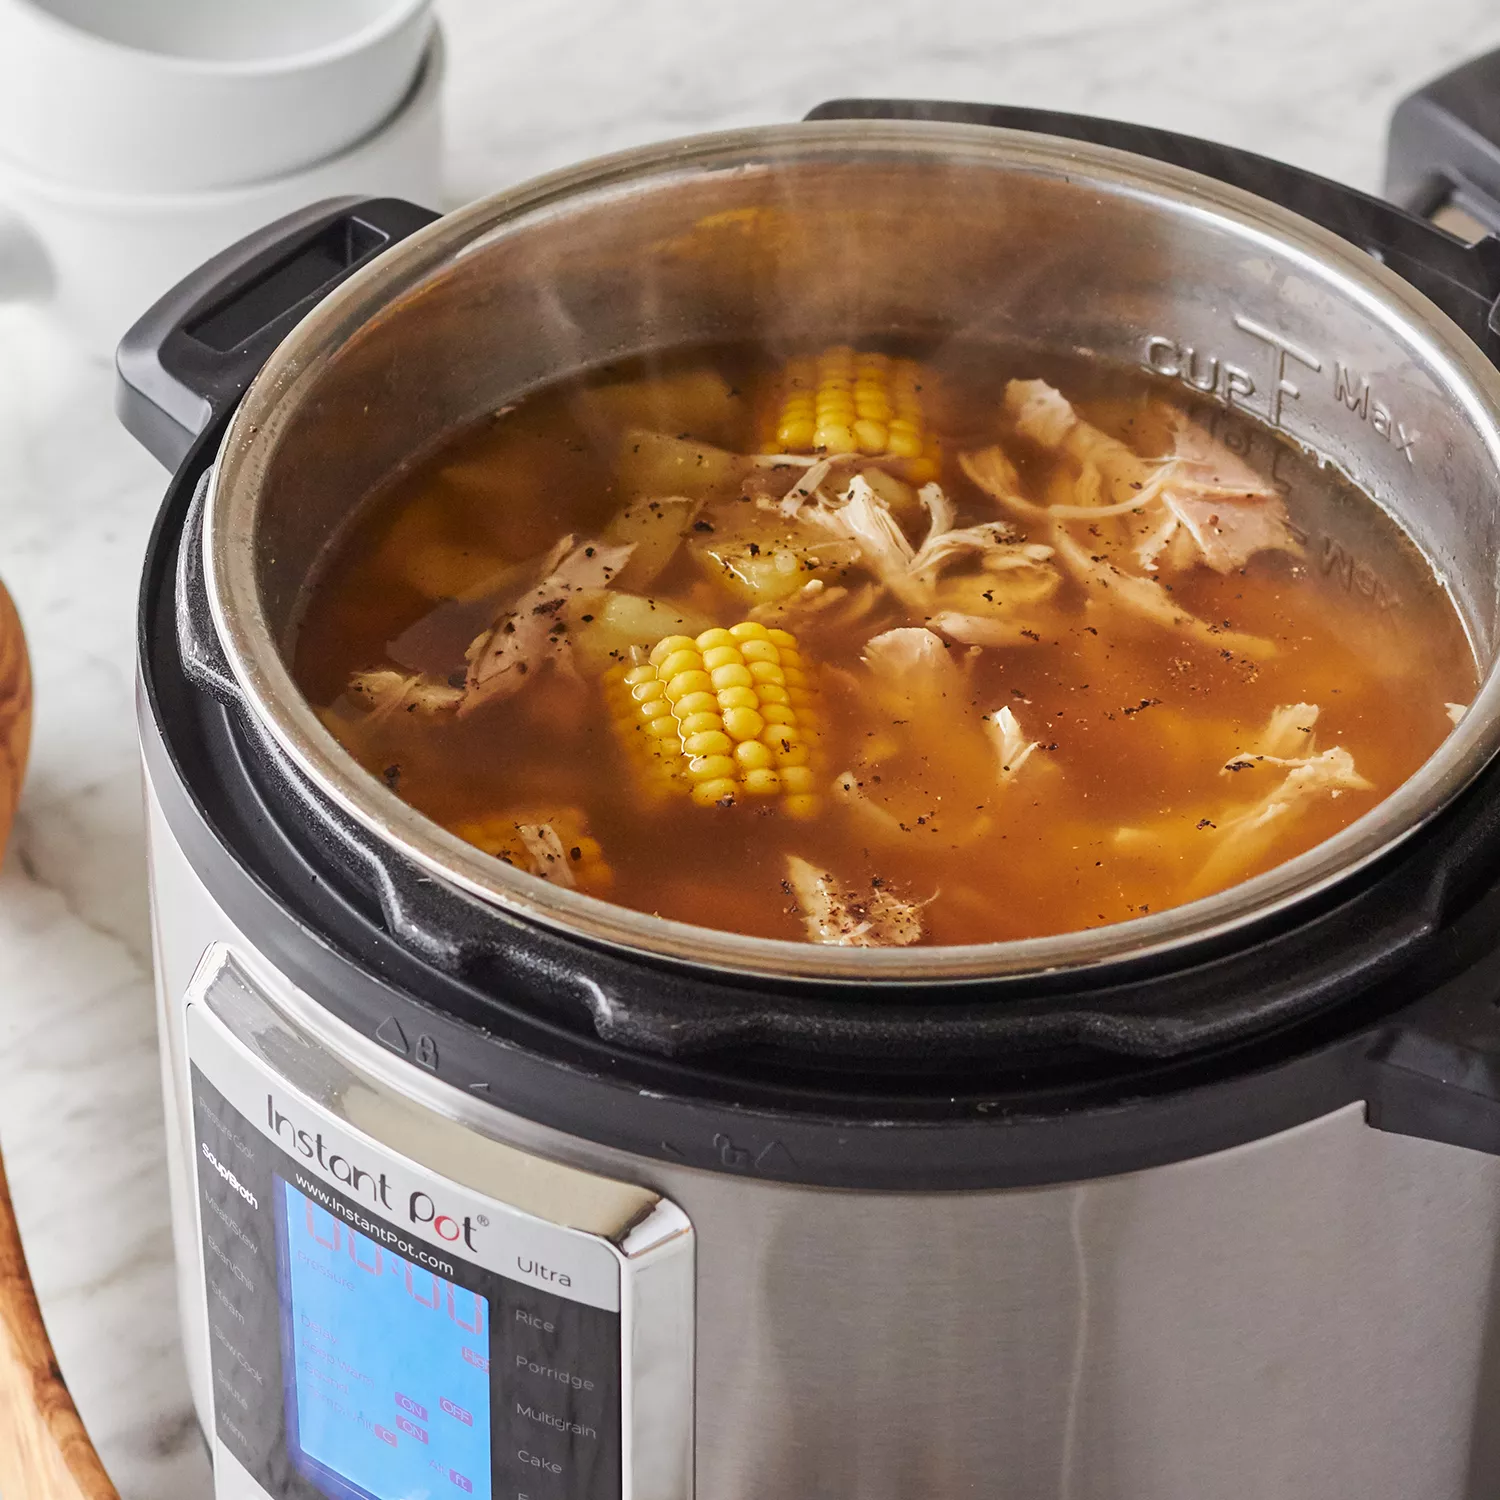 Instant Pot Ultra (3-quart) on sale for $99.95 at